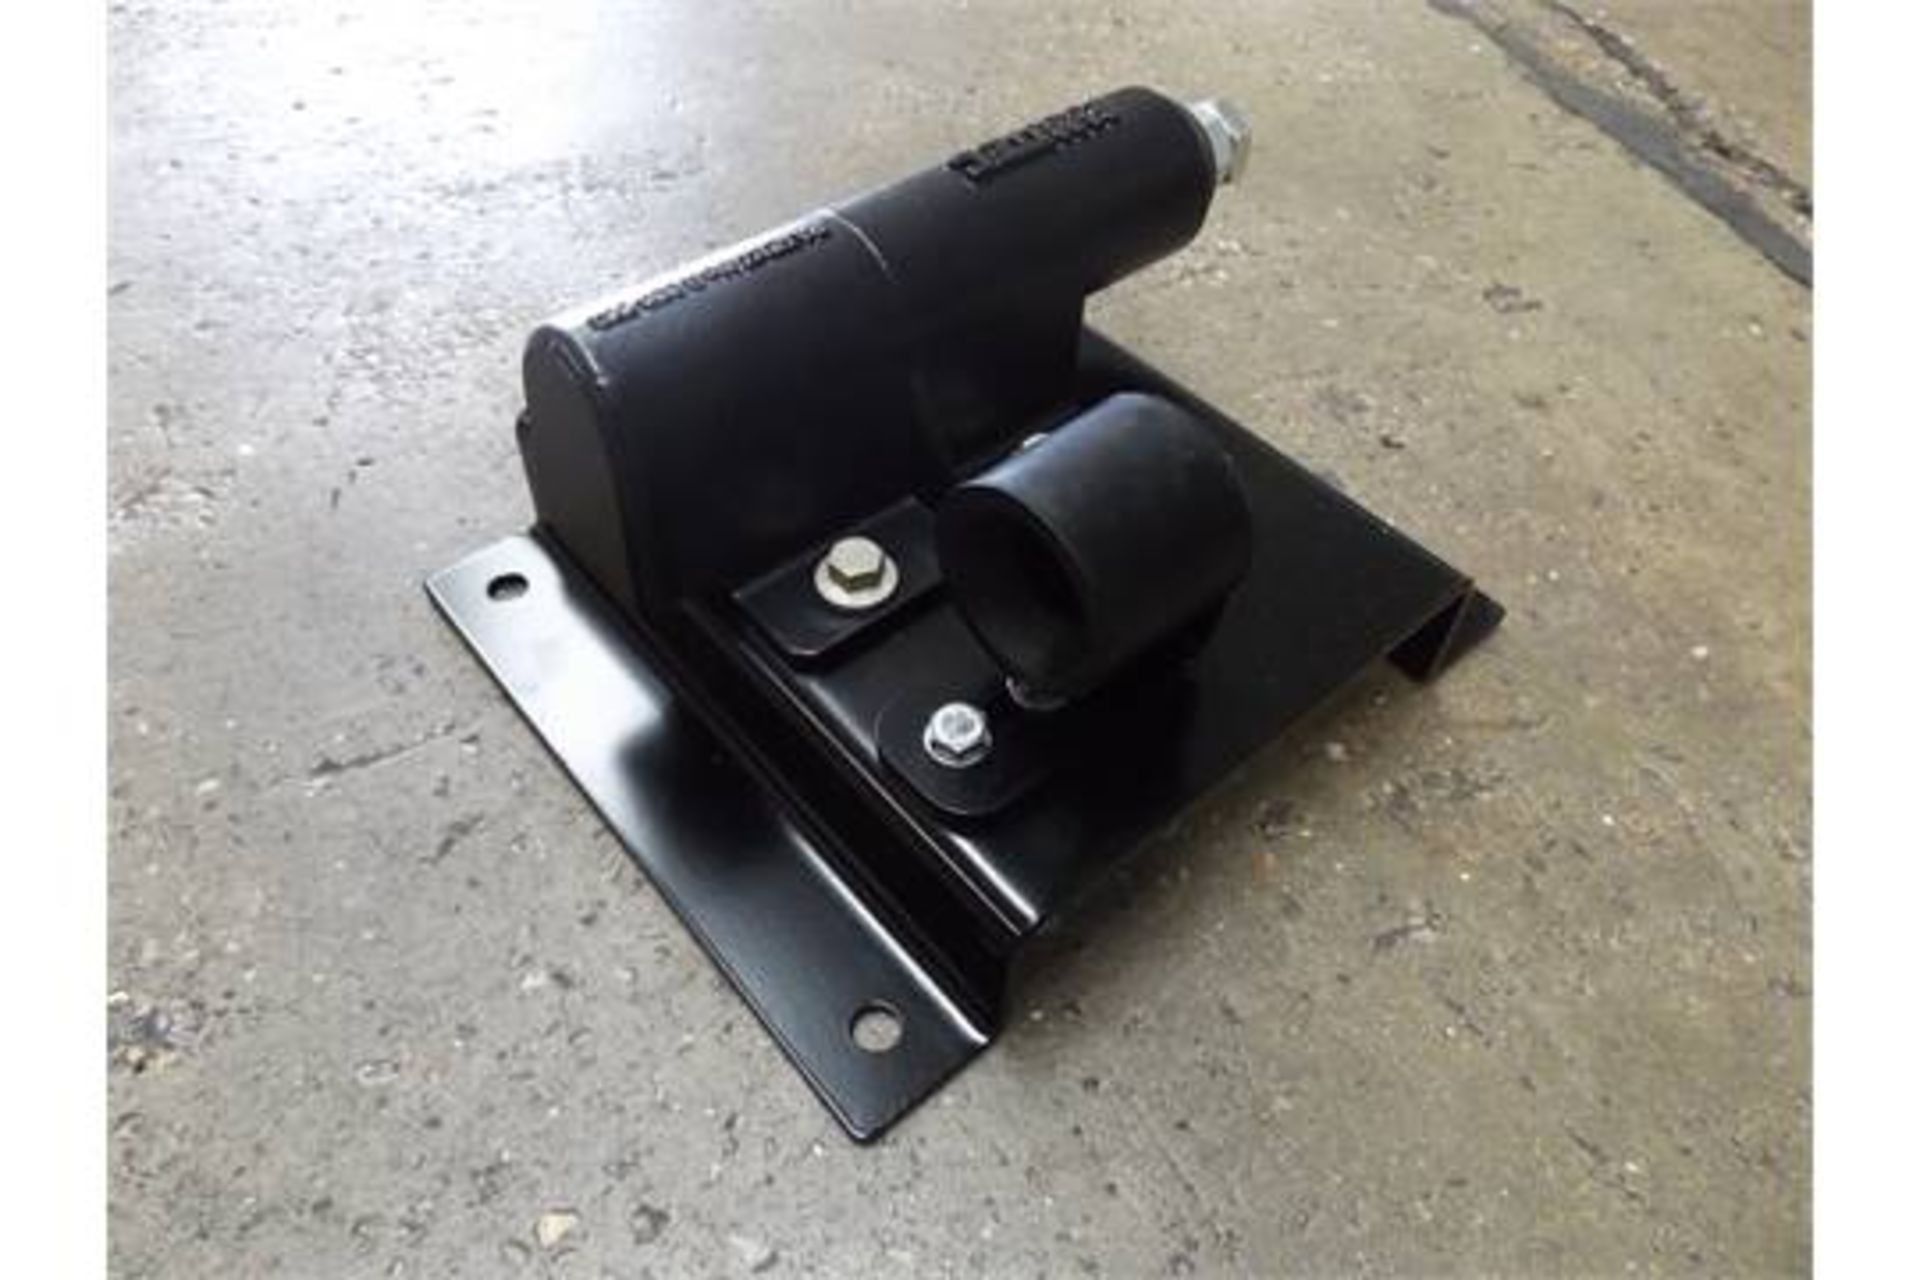 Approx 30 x Land Rover Defender Swing Out Spare Wheel Carrier Kits P/No VPLDR0129 - Image 6 of 11